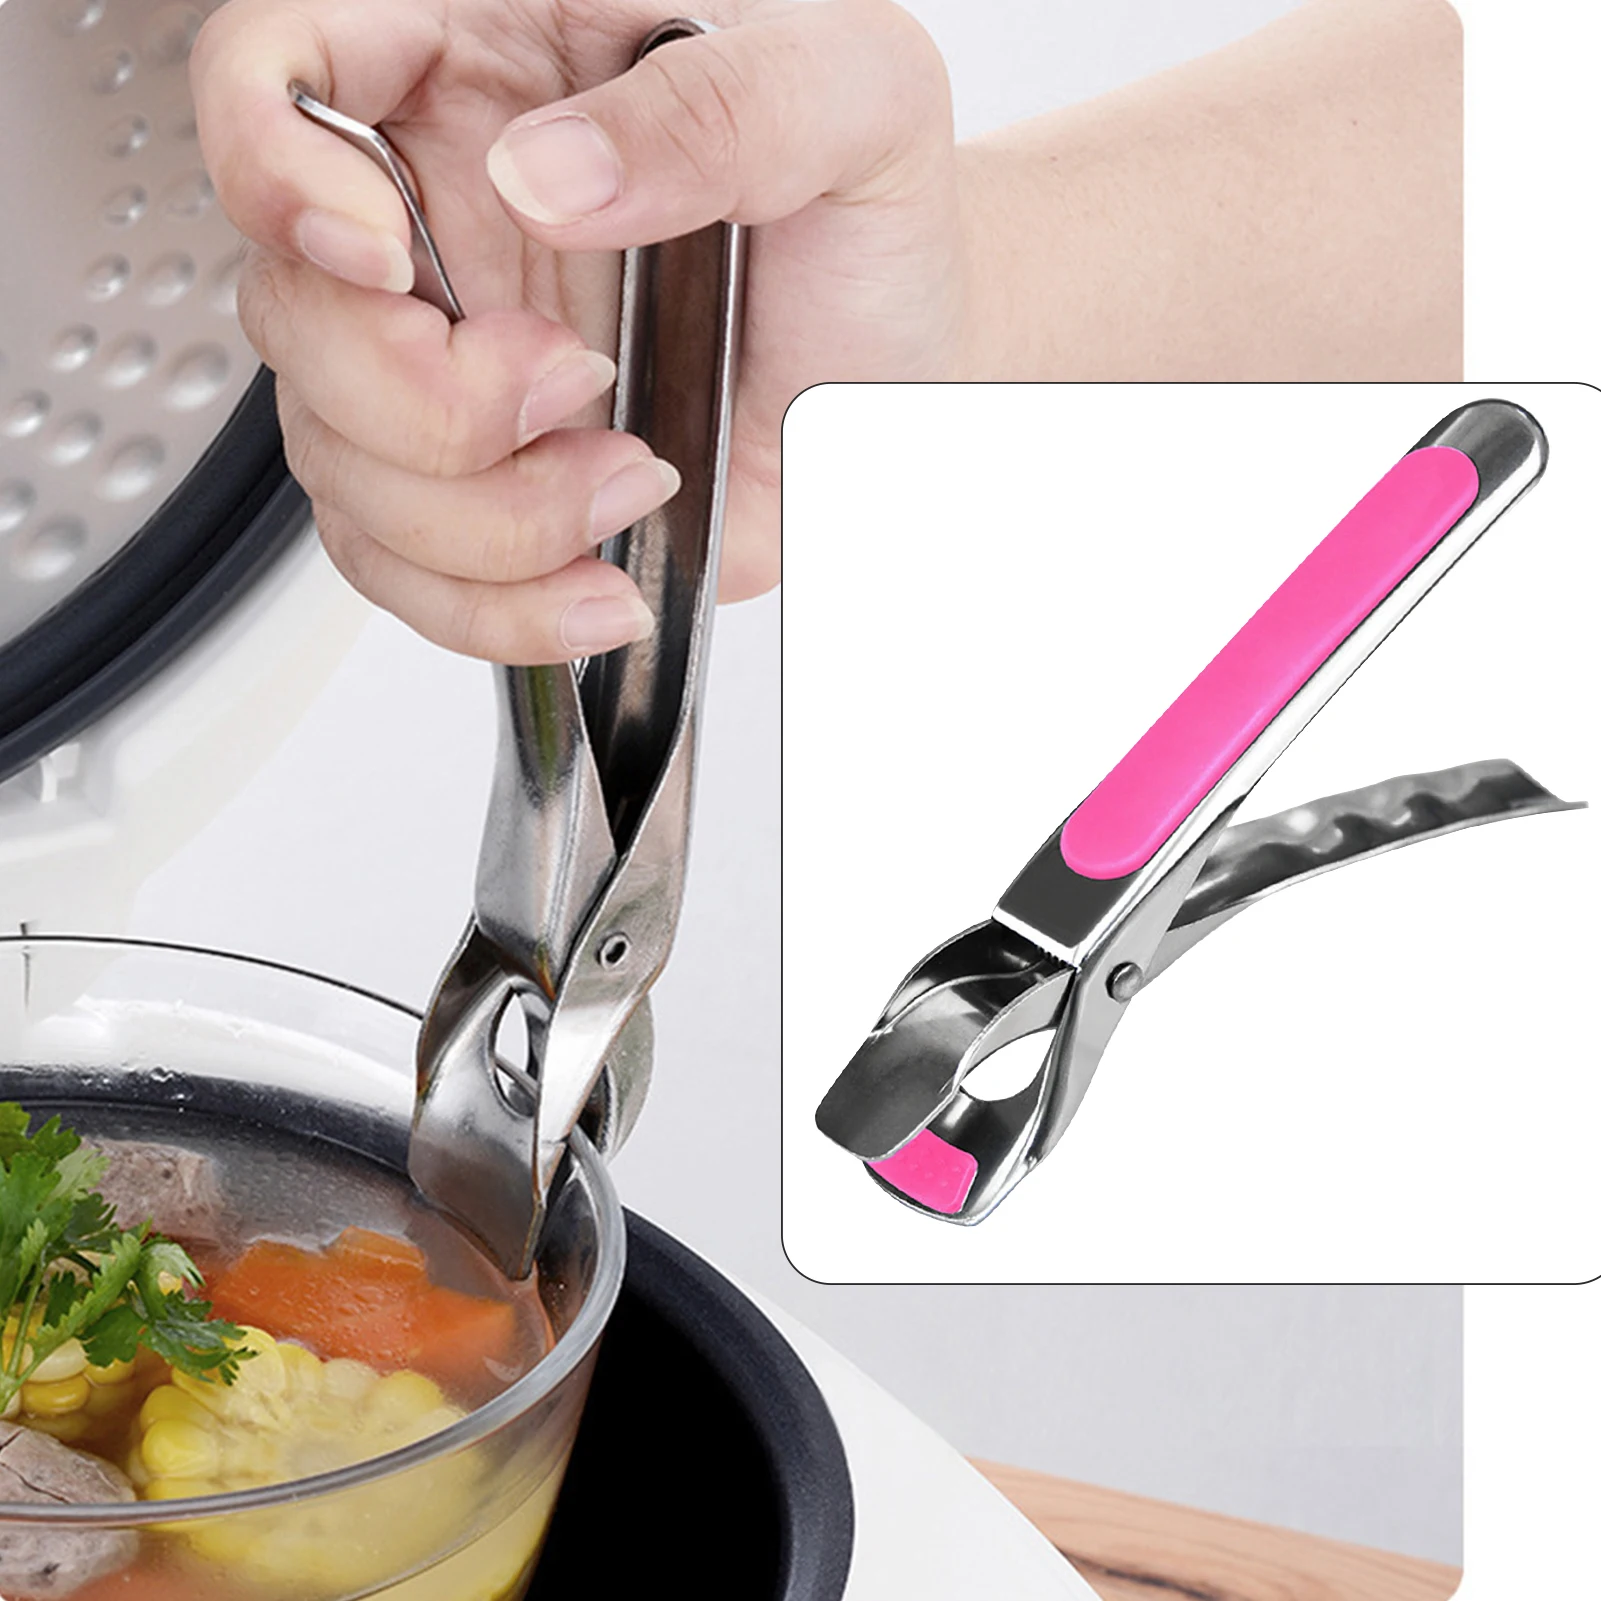 Gripper Clips Tongs for Lifting Hot Dishs Bowl Pot Pan Plate 